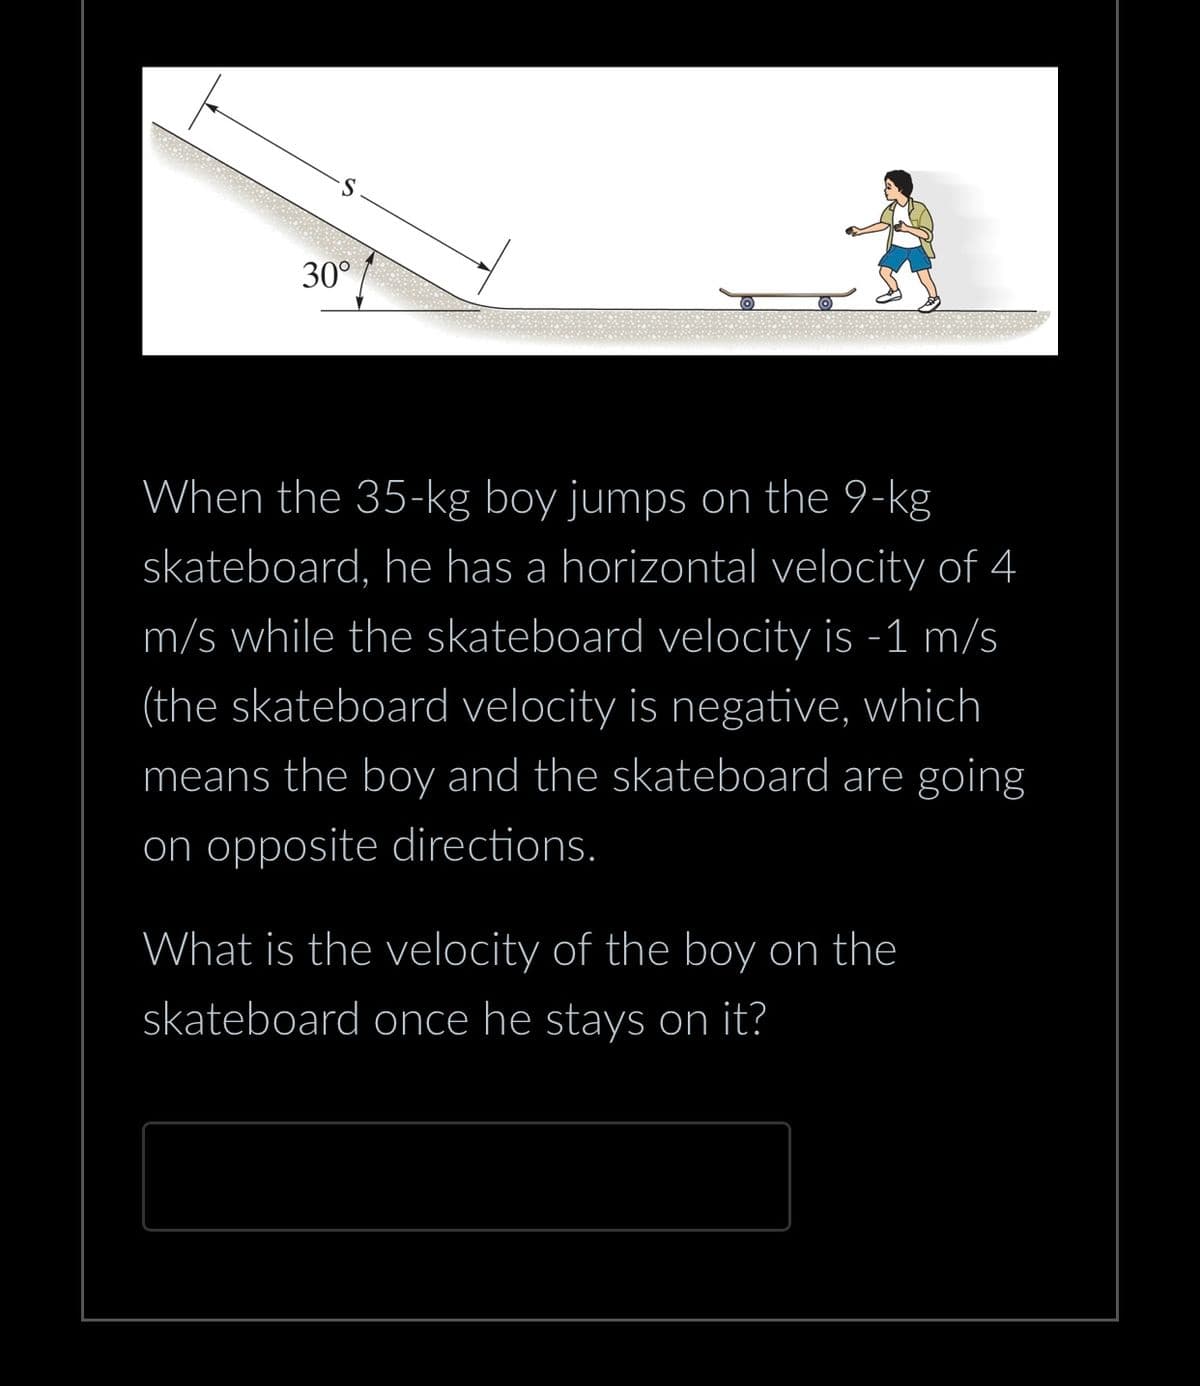 30°
When the 35-kg boy jumps on the 9-kg
skateboard, he has a horizontal velocity of 4
m/s while the skateboard velocity is -1 m/s
(the skateboard velocity is negative, which
means the boy and the skateboard are going
on opposite directions.
What is the velocity of the boy on the
skateboard once he stays on it?